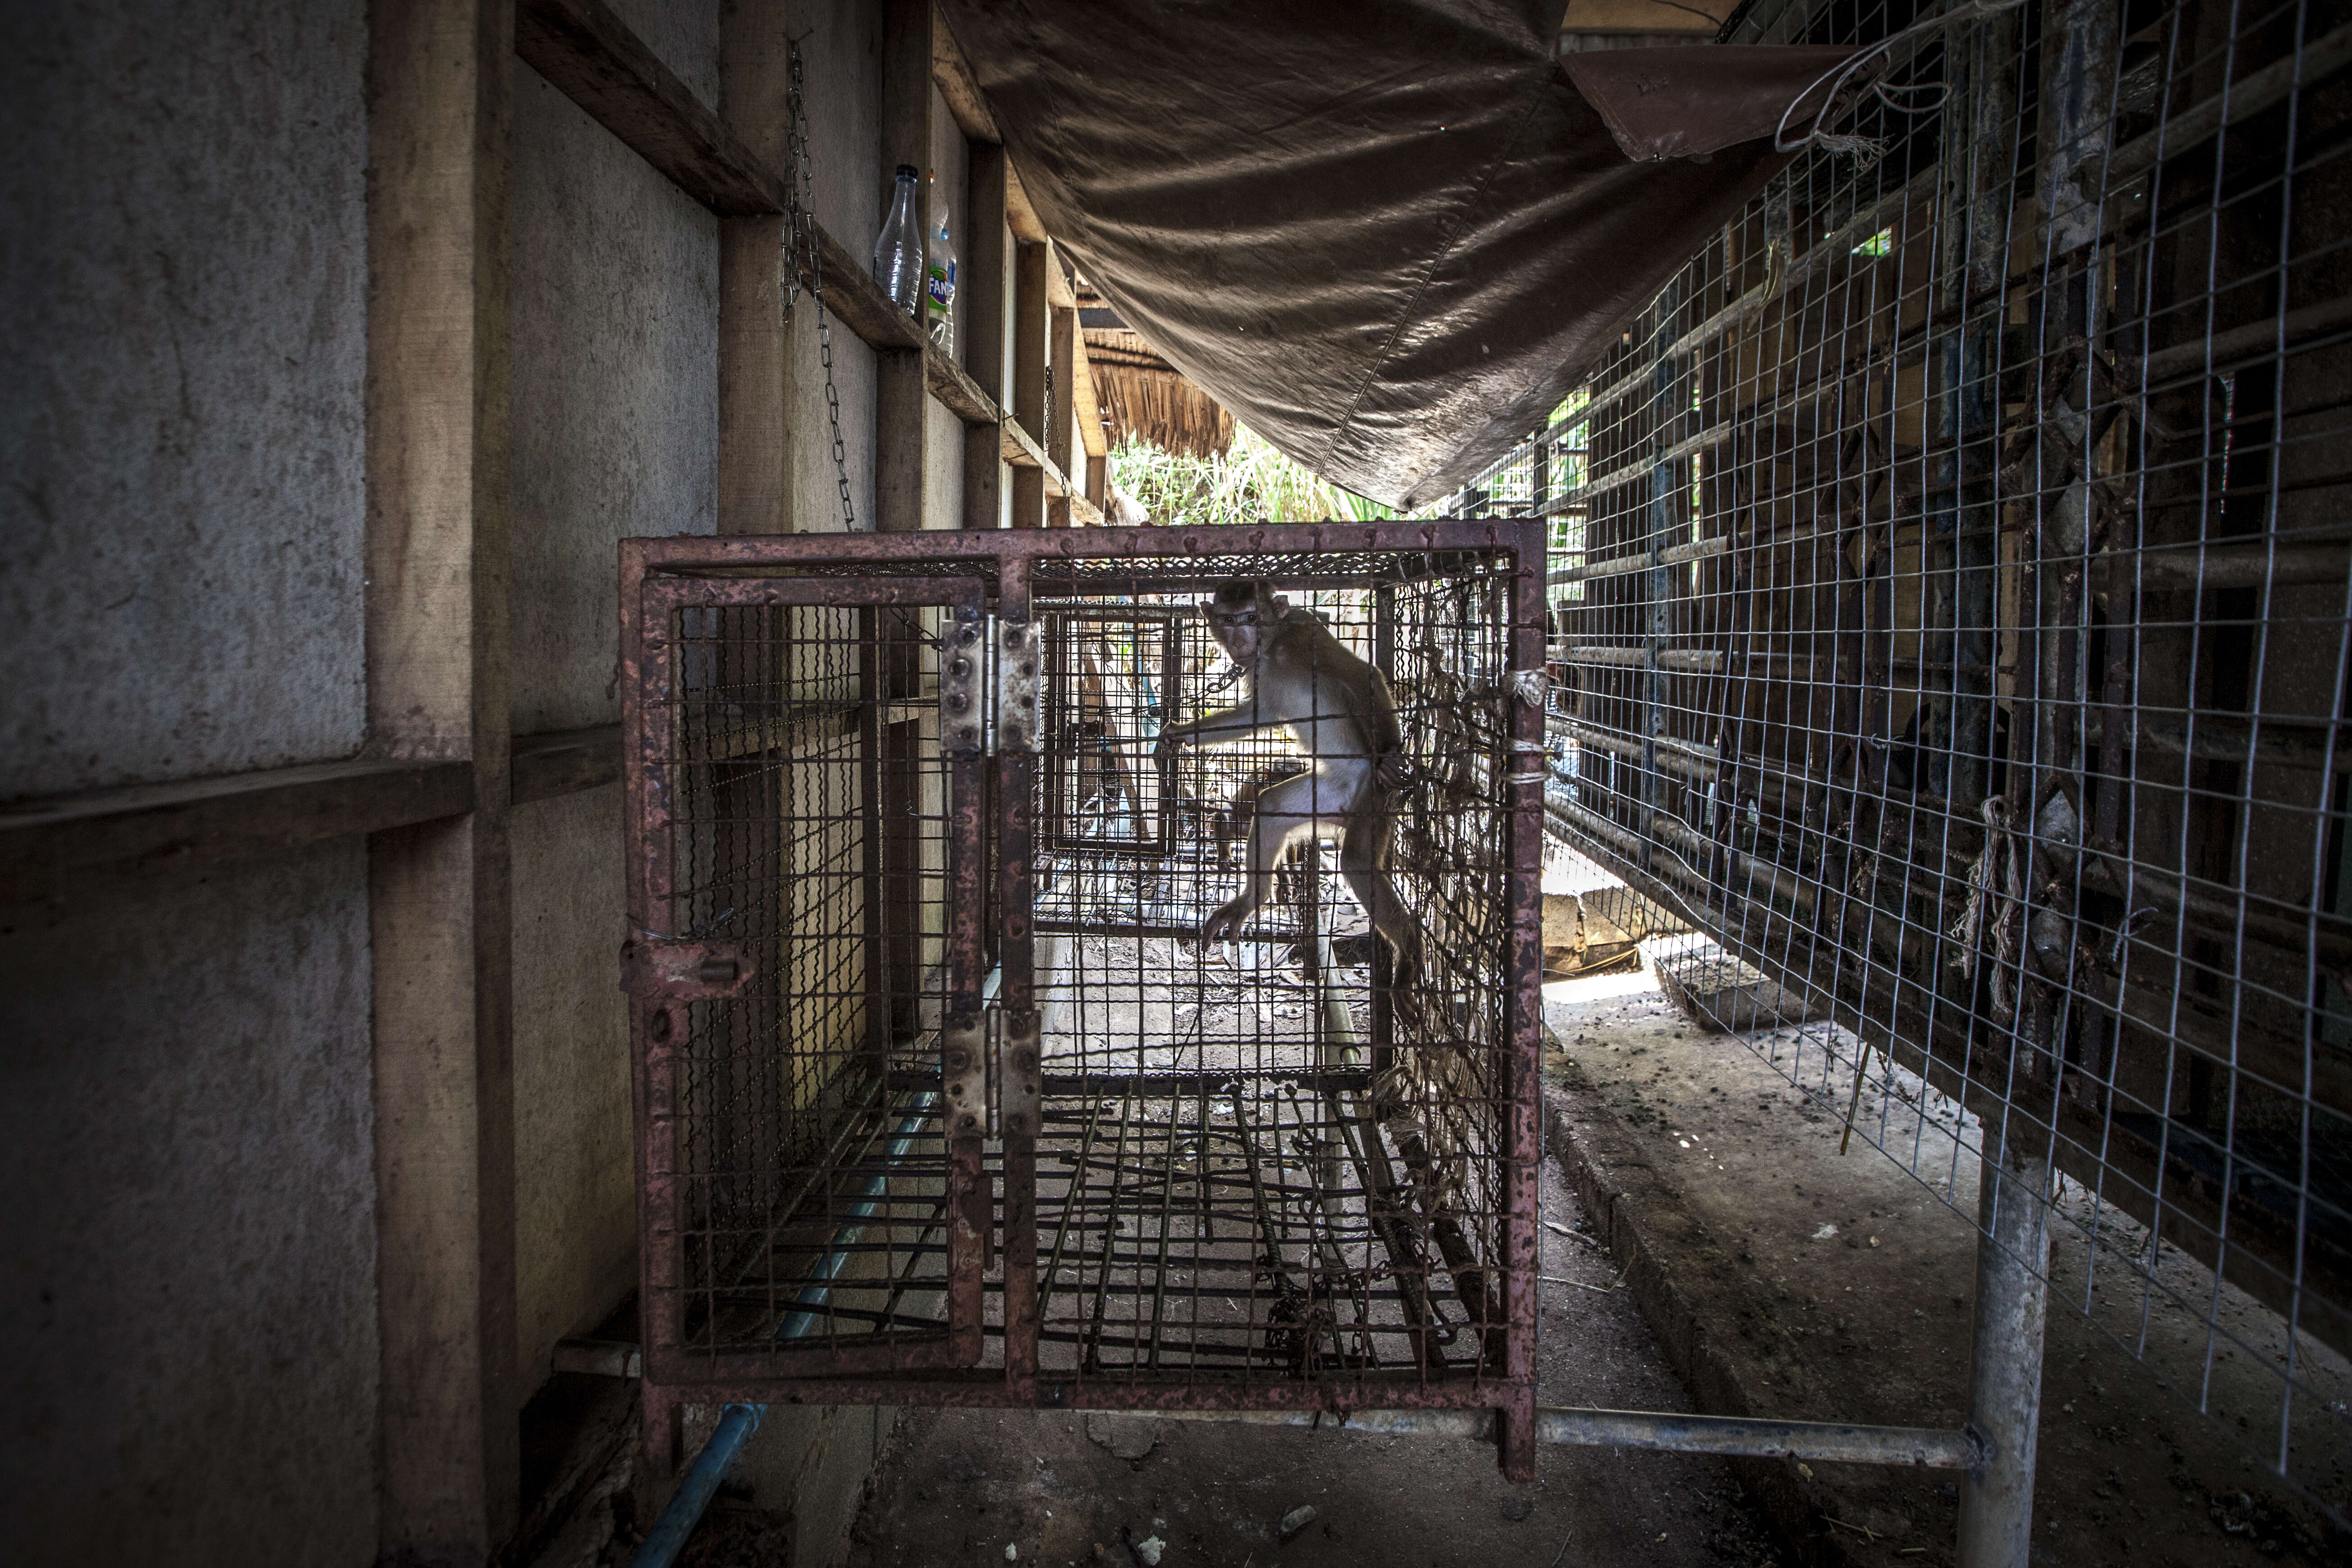 Macaque monkeys stuck inside small cages